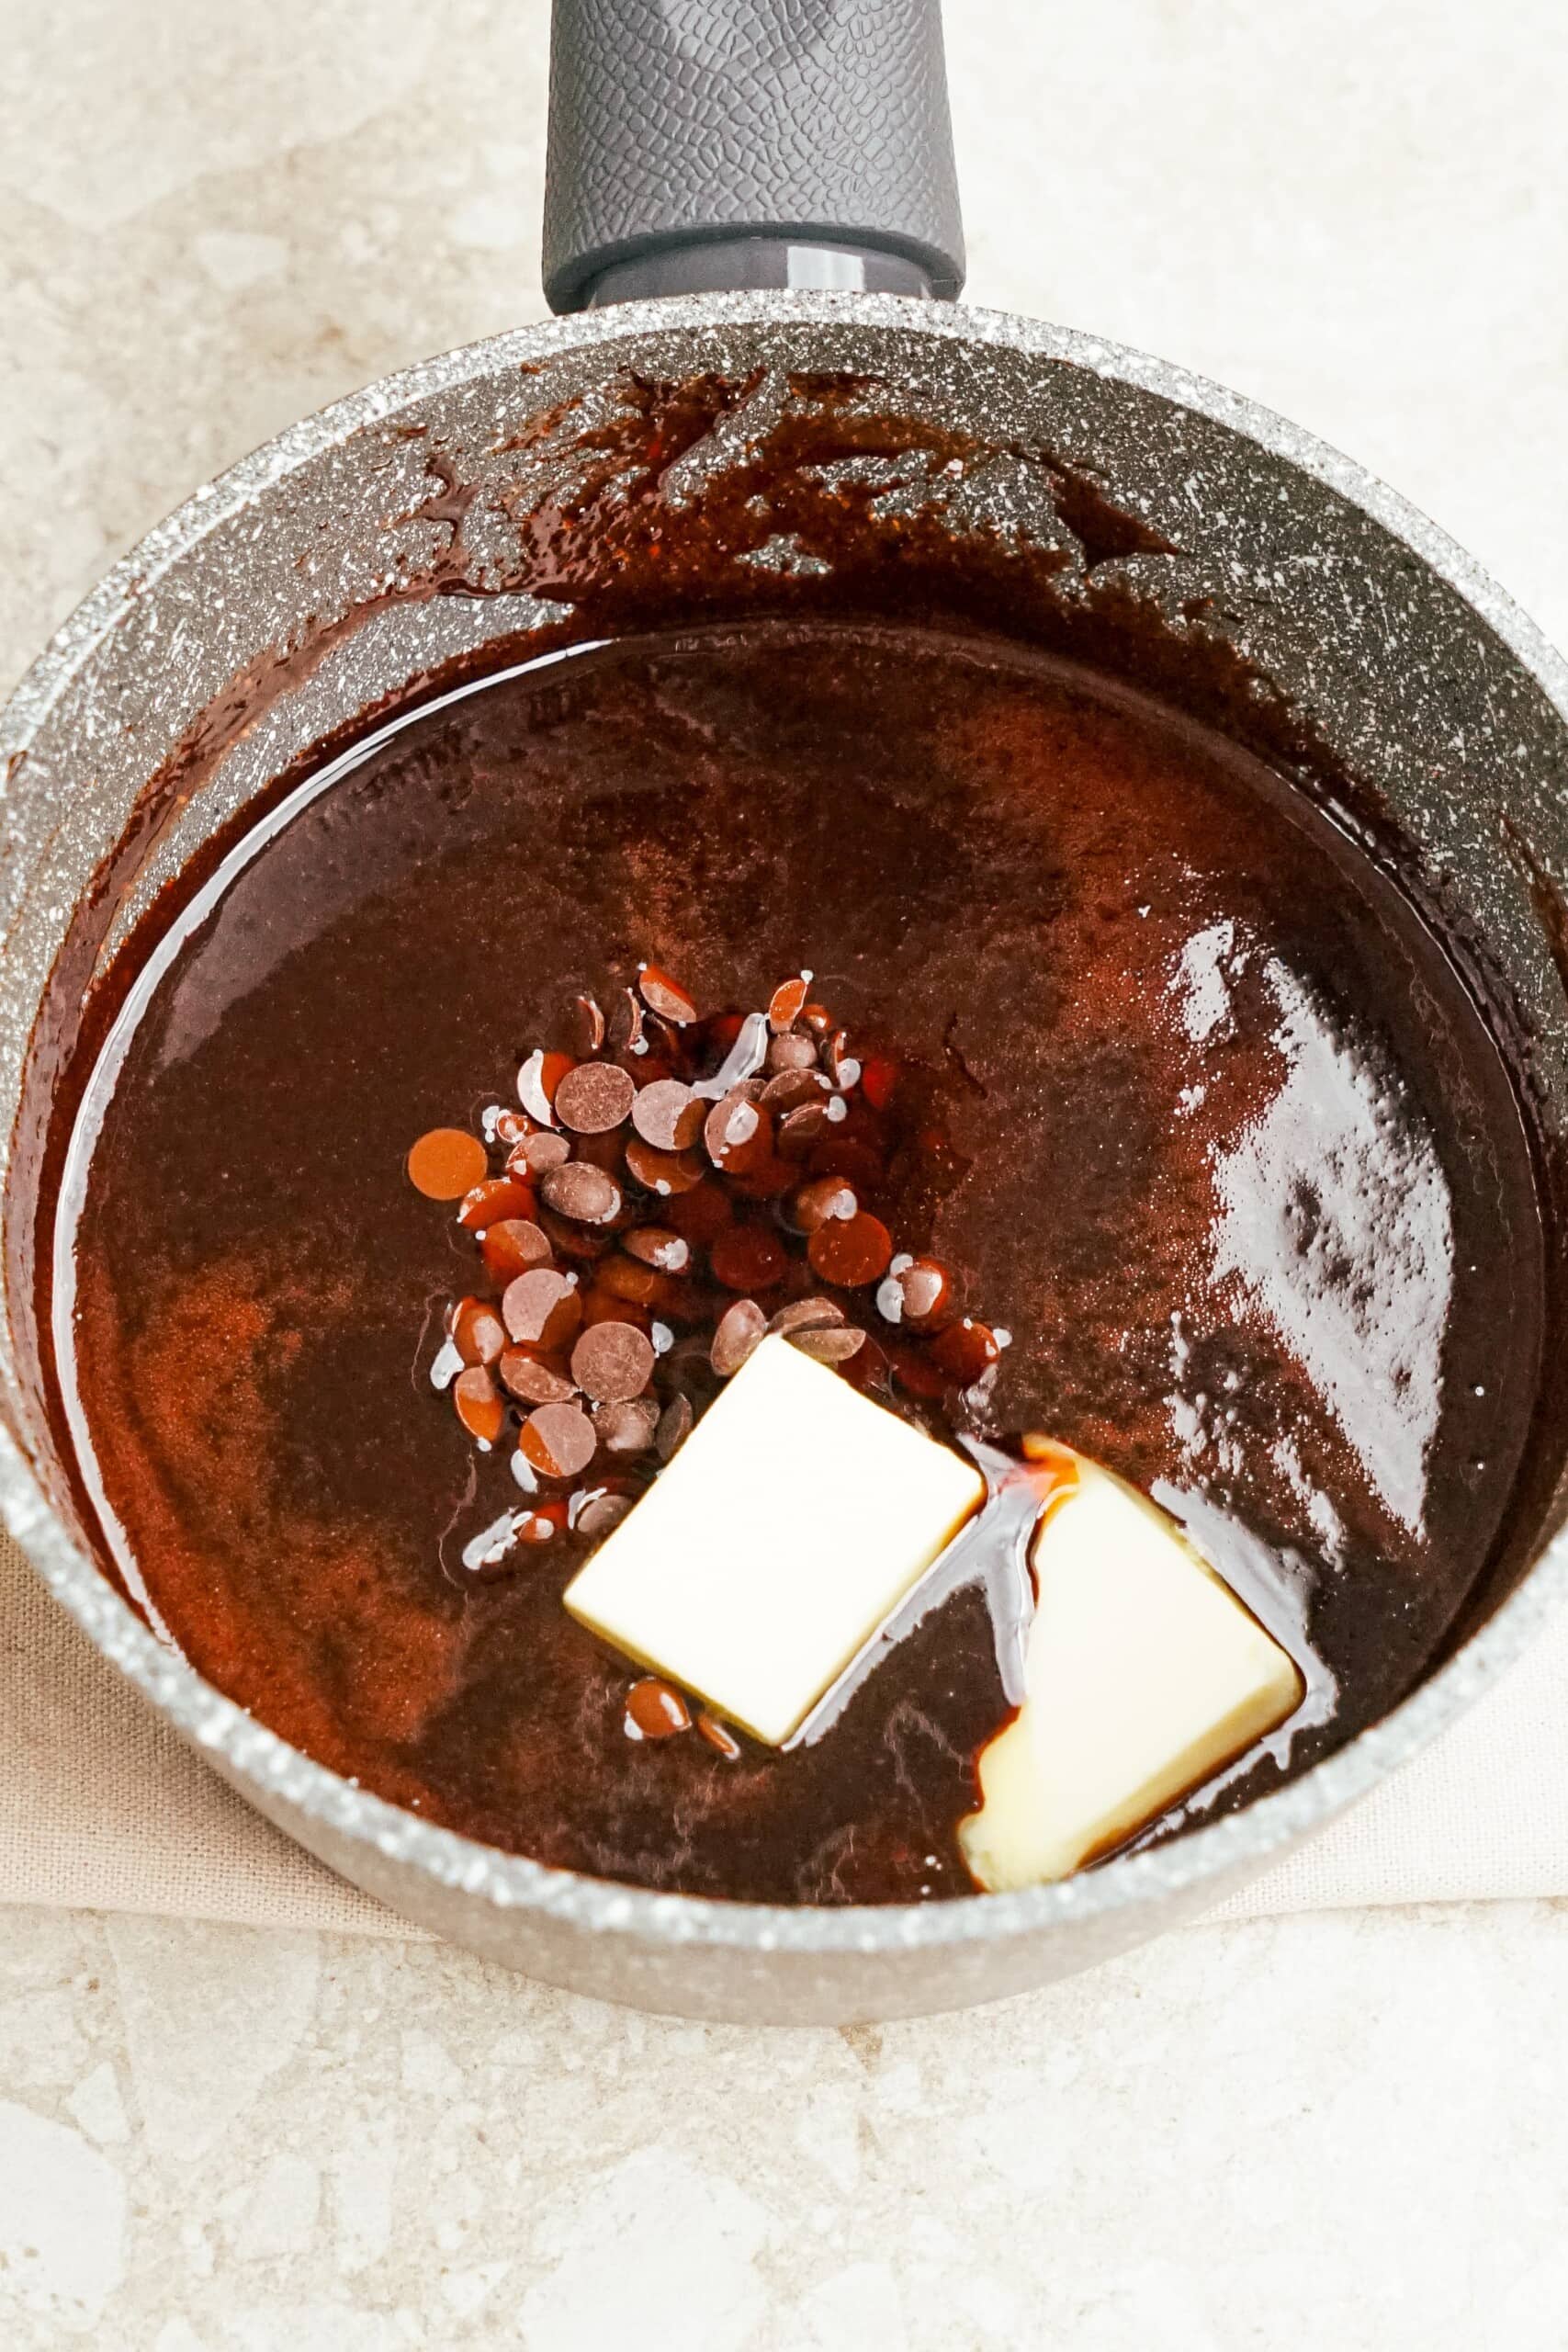 butter added to hot fudge mixture in a saucepan